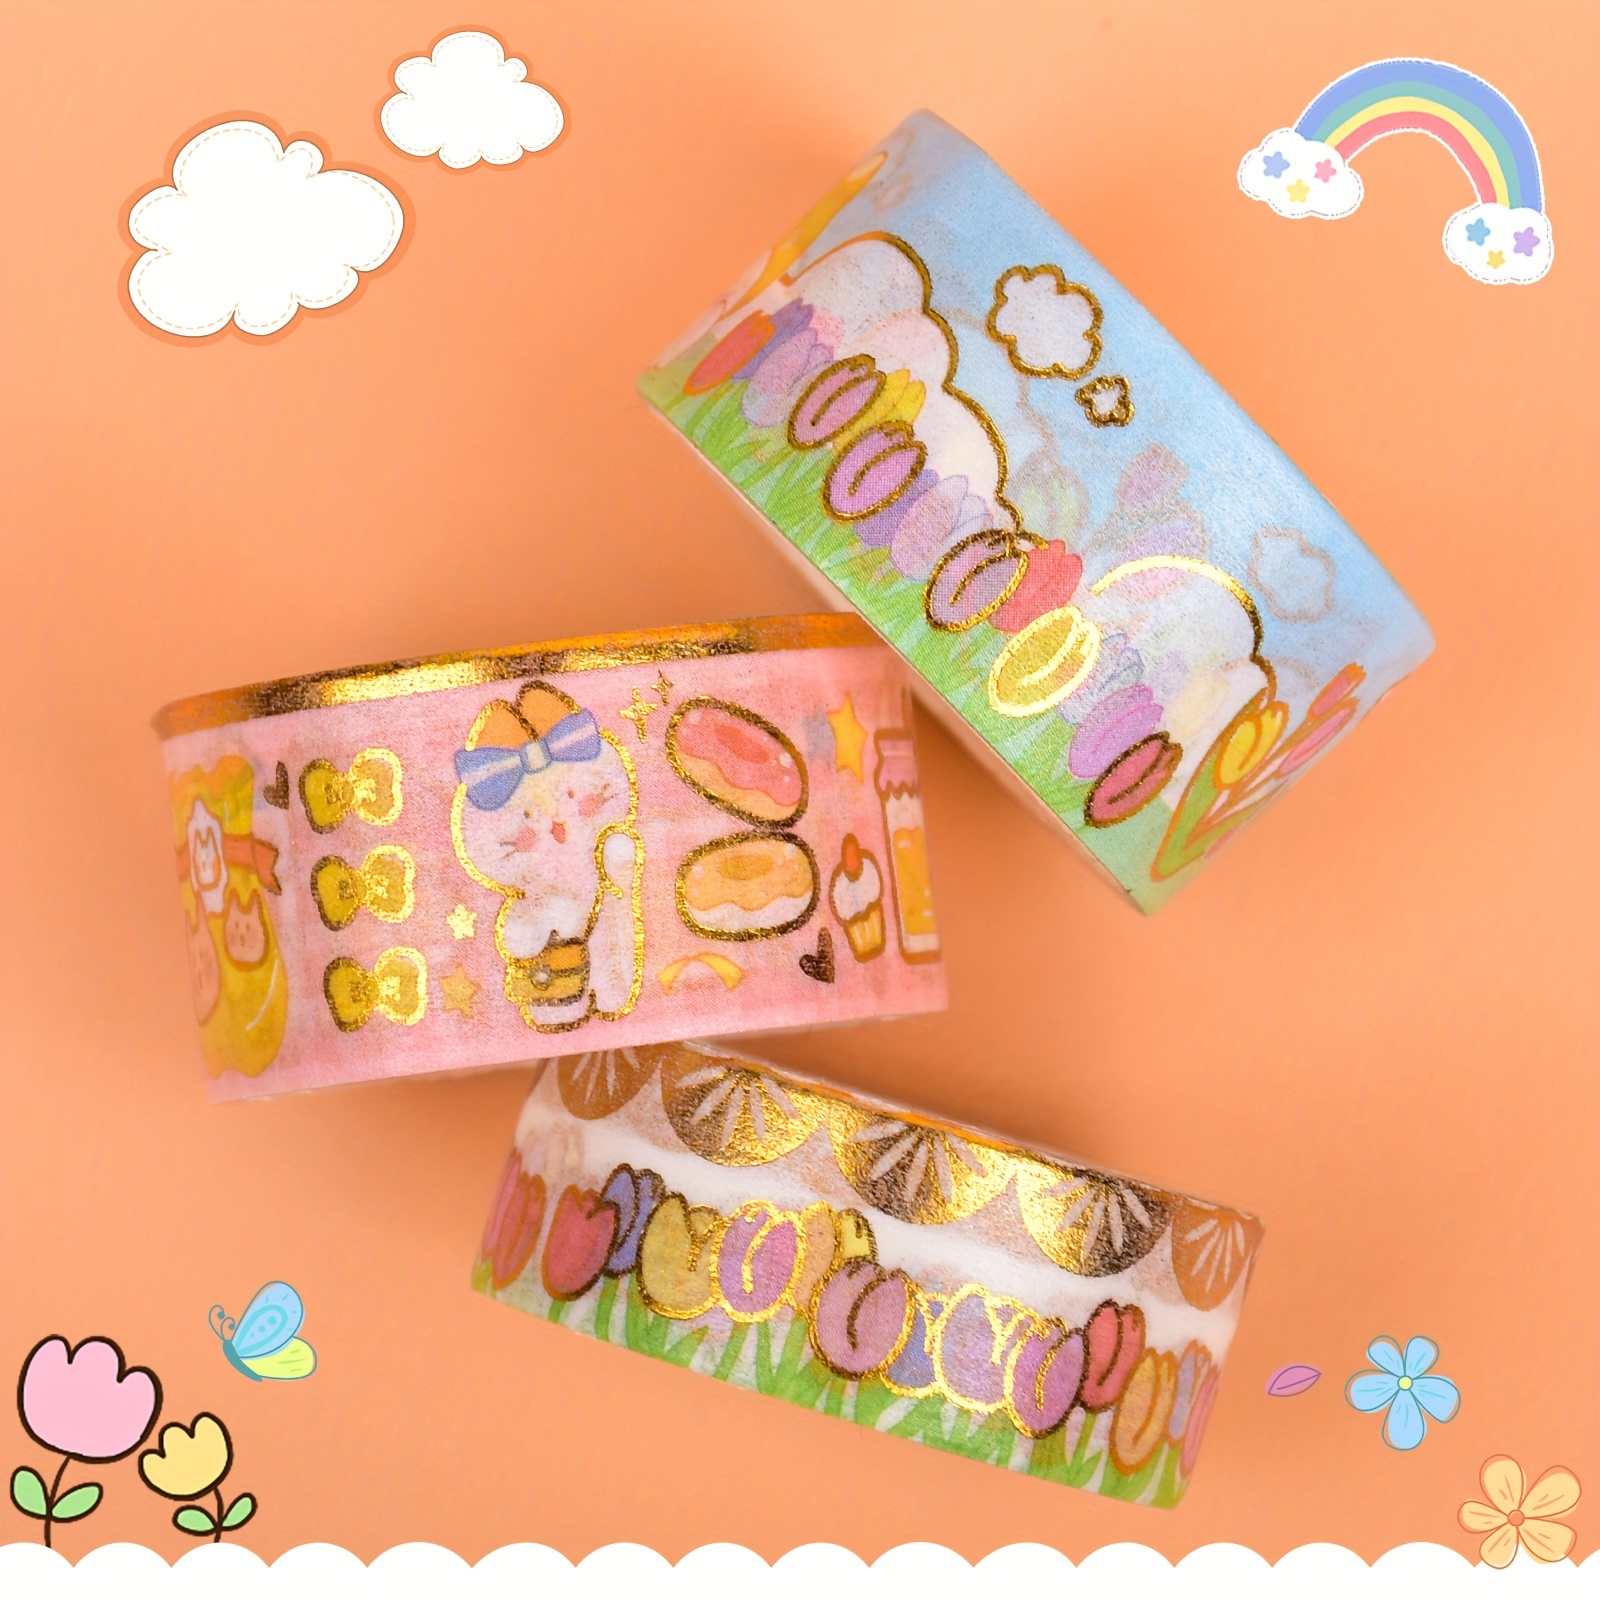  slapaflife Cute Washi Tape Set 50 Rolls Kawaii Animals Gold  Foil Decorative Masking Tape for Scrapbook,Washi Tape for Journaling,Scrapbooking  Supplies,Party Decorations,Bullet Journals : Arts, Crafts & Sewing